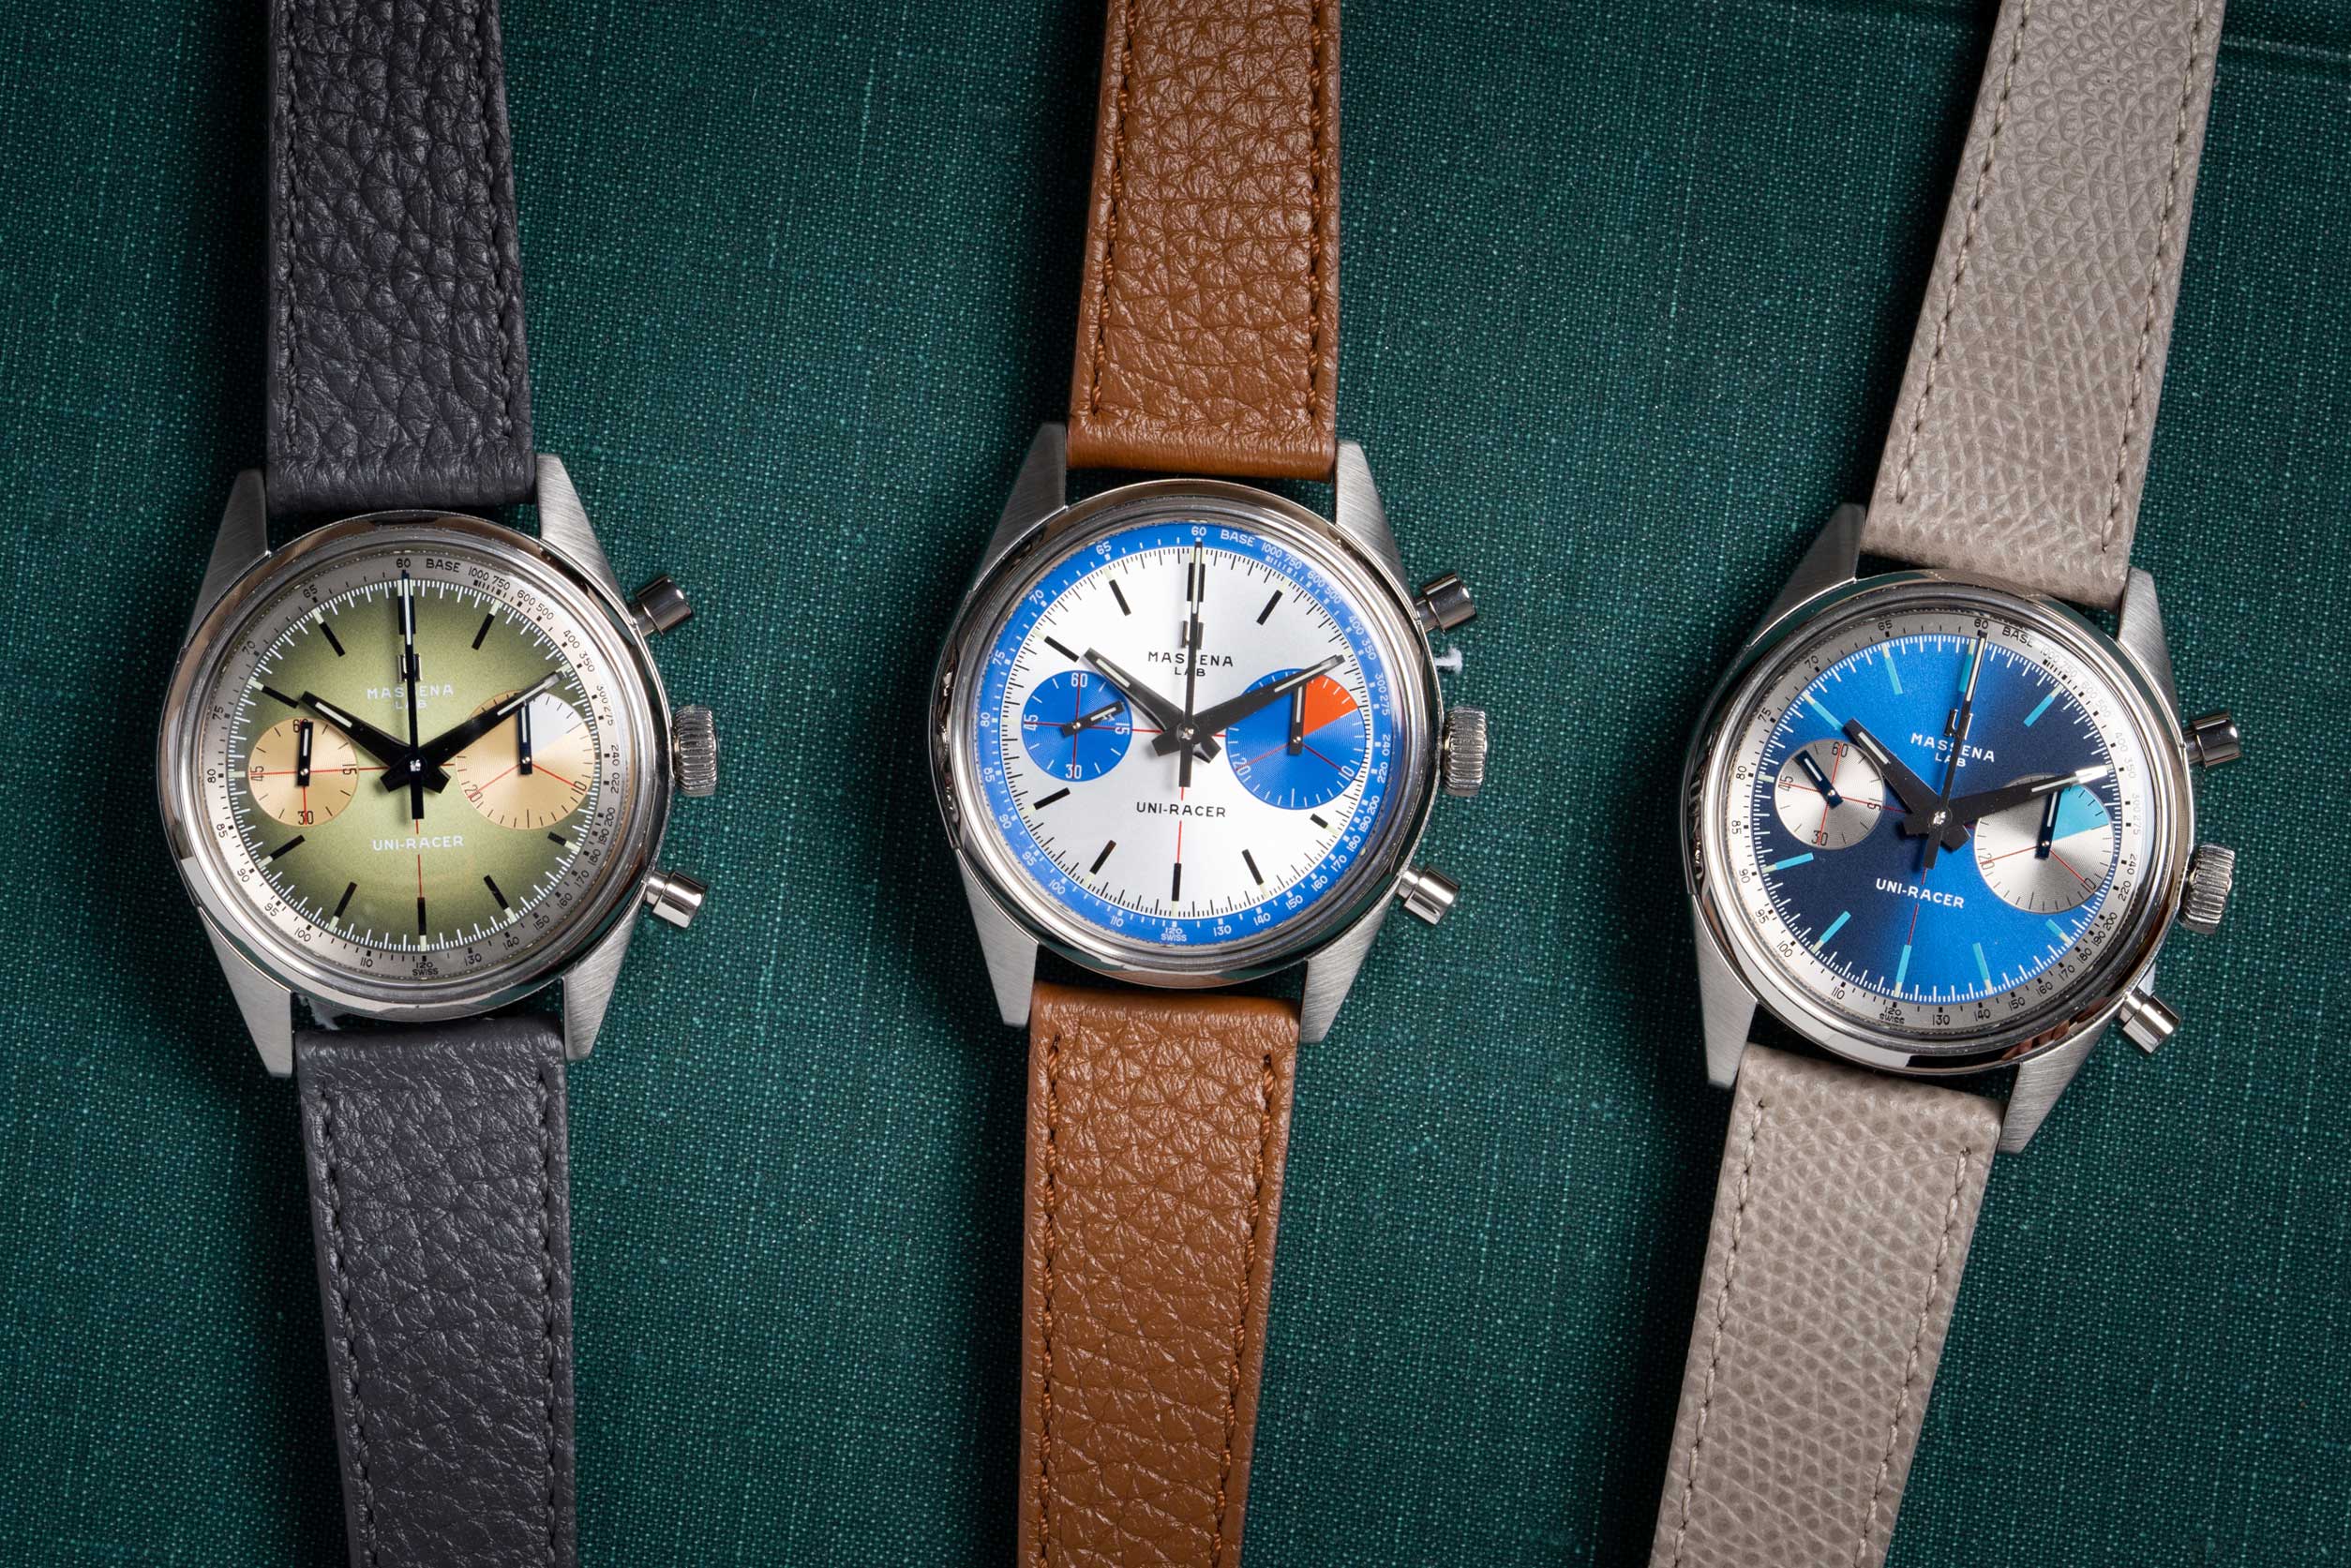 Massena LAB introduces a new trio of Uni-Racer watches with “Holiday” color configuration